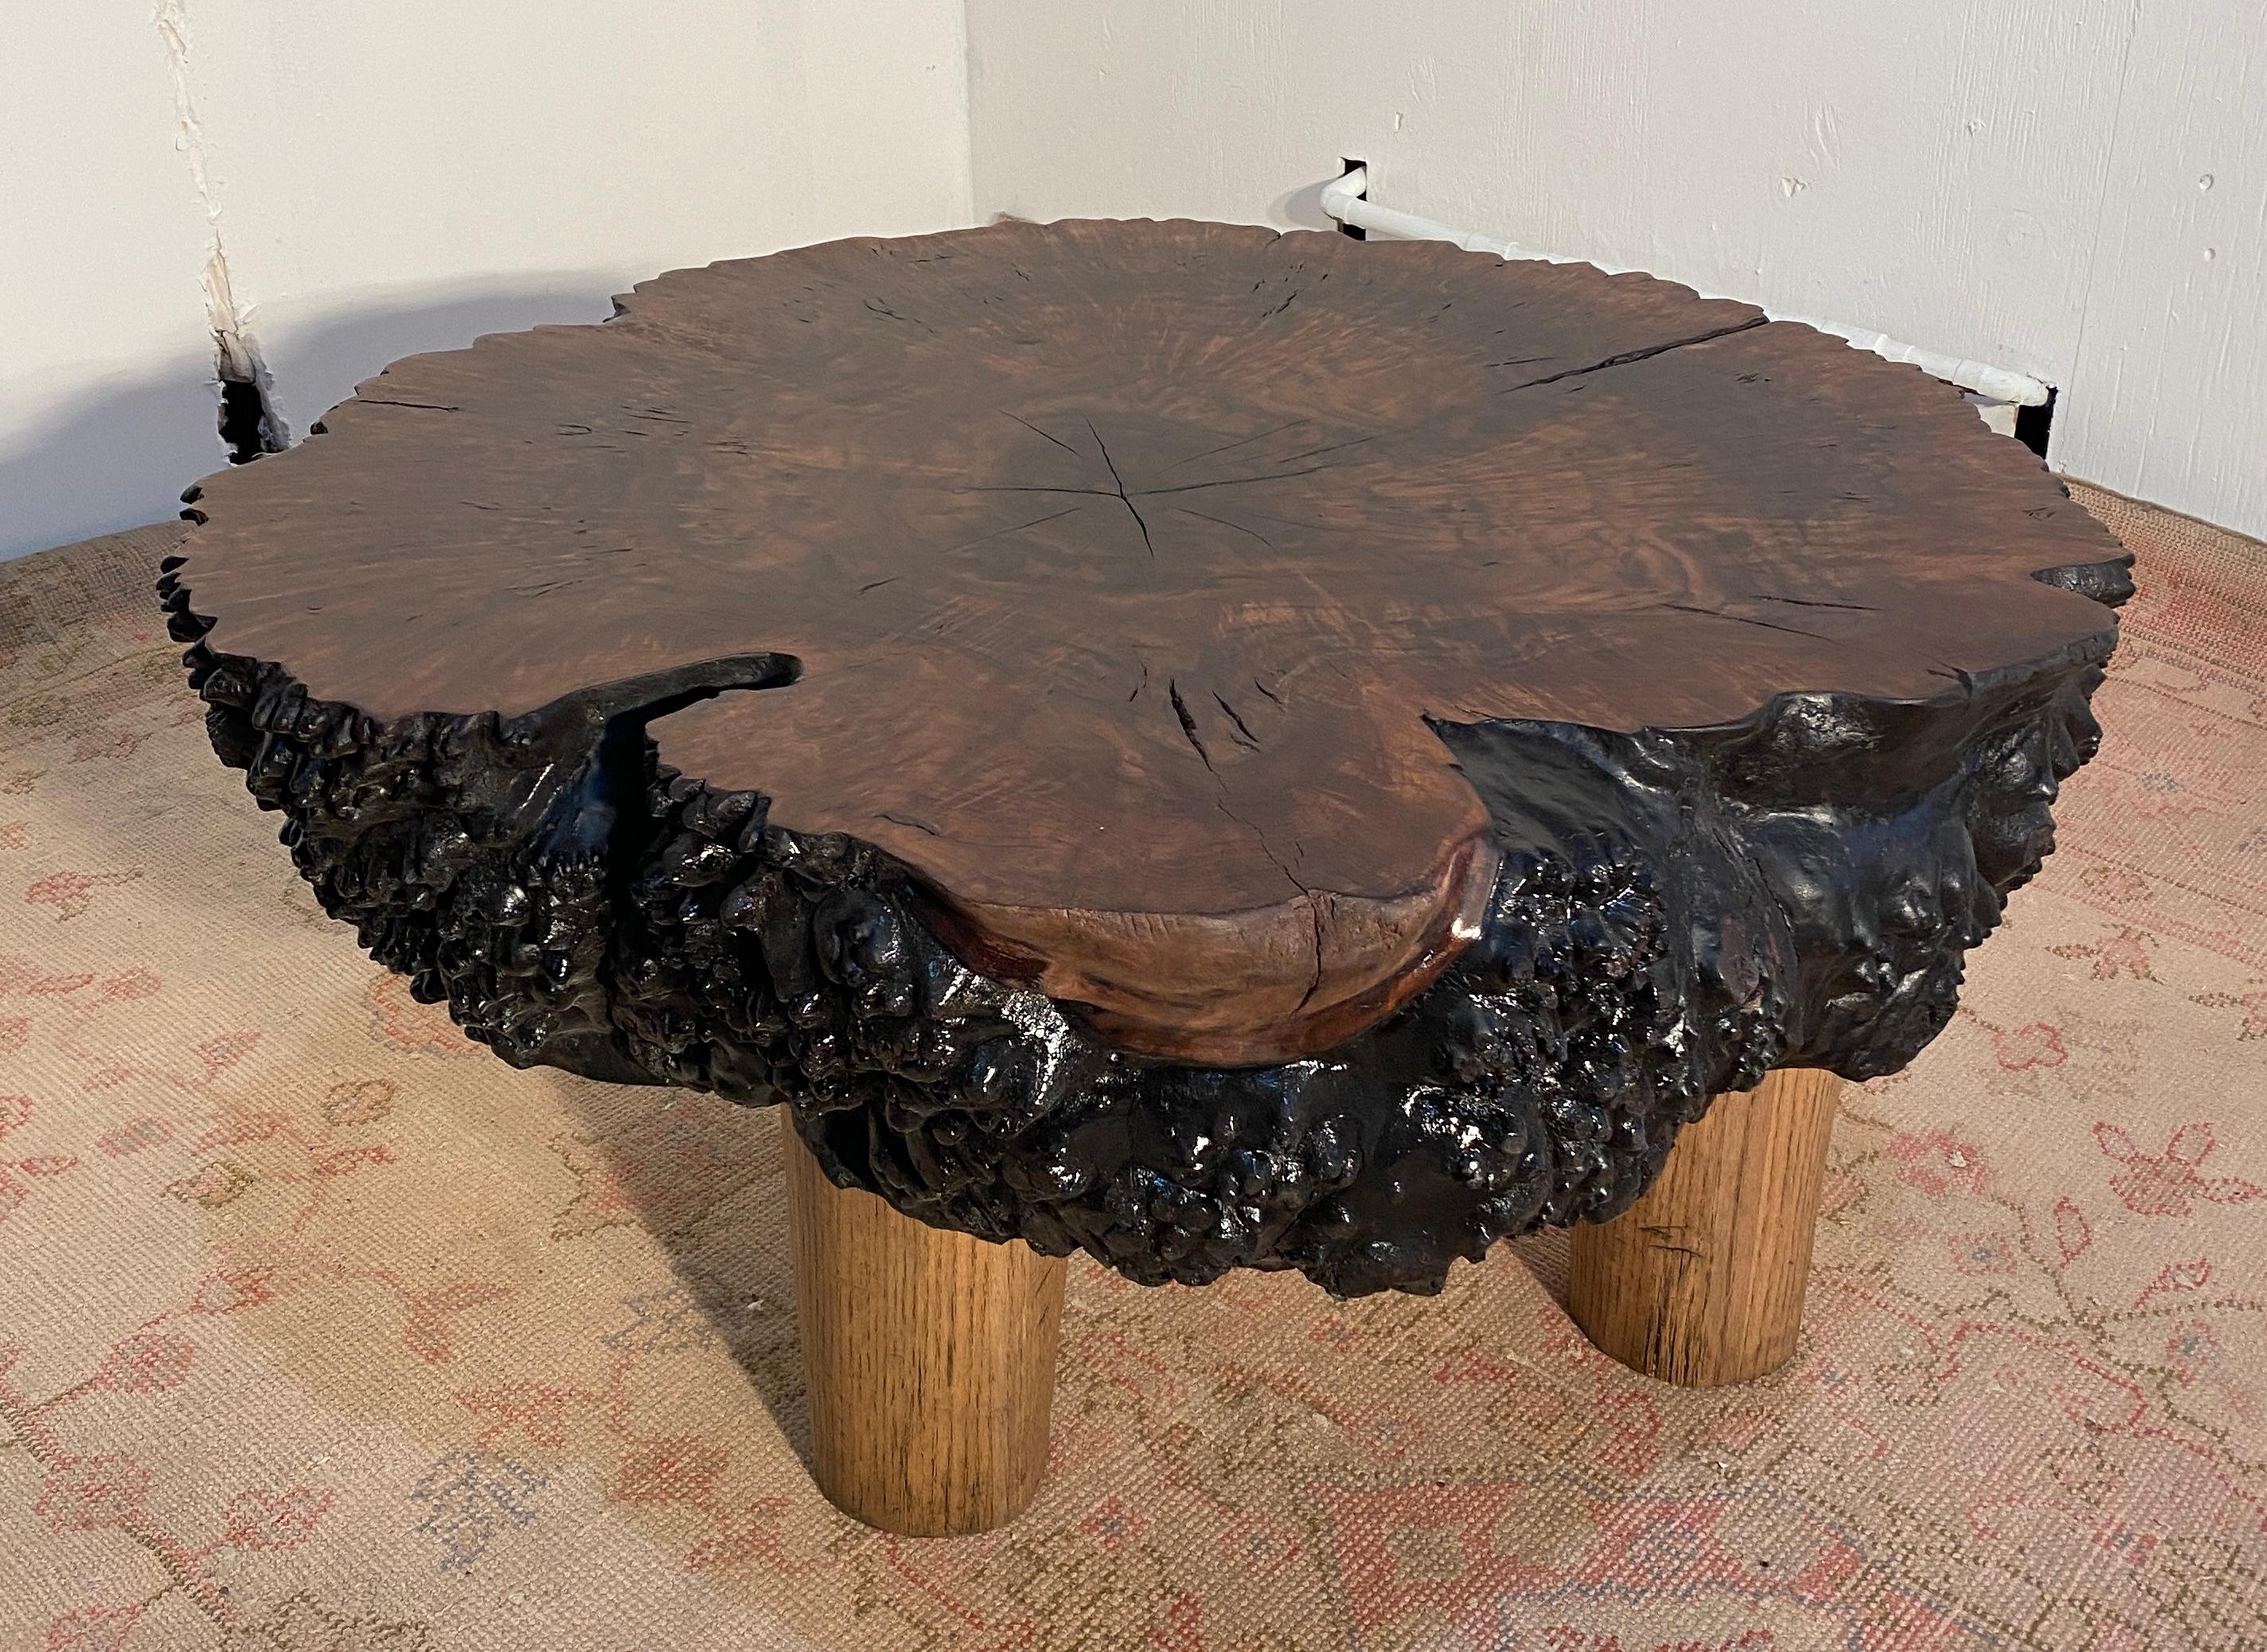 These one of a kind indiginous rugged primeval burl tables are of veritable vitality due to their
naturalistic form. We retained the bark sub-strata which gives the table it's rough texture. The
shell has been finished with a special lacquer over